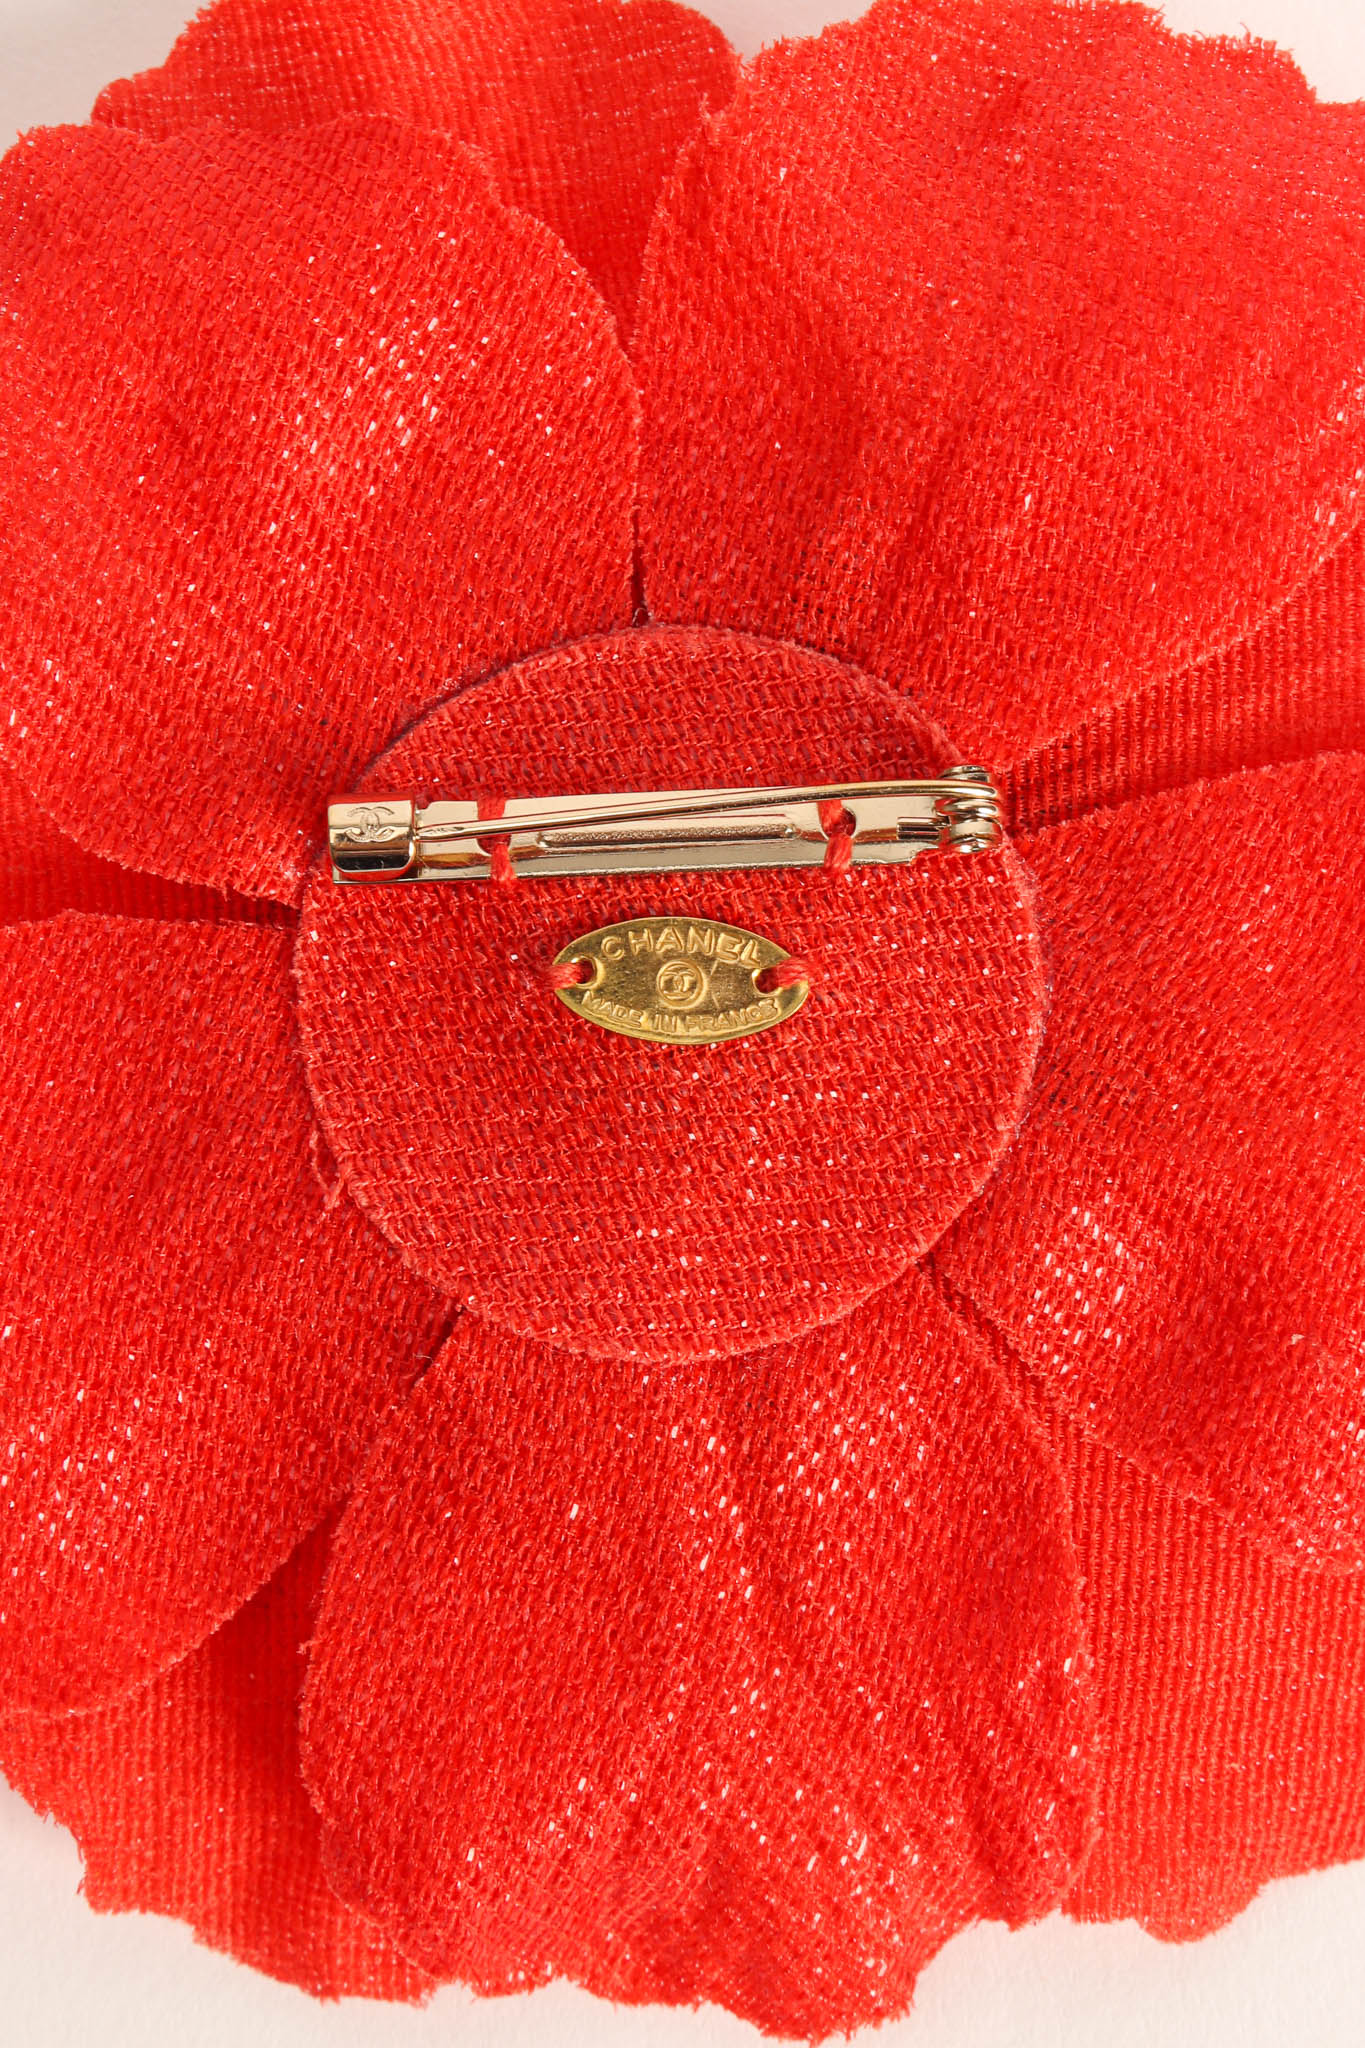 Vintage Chanel Woven Bloom Flower Pin signed @ Recess Los Angeles